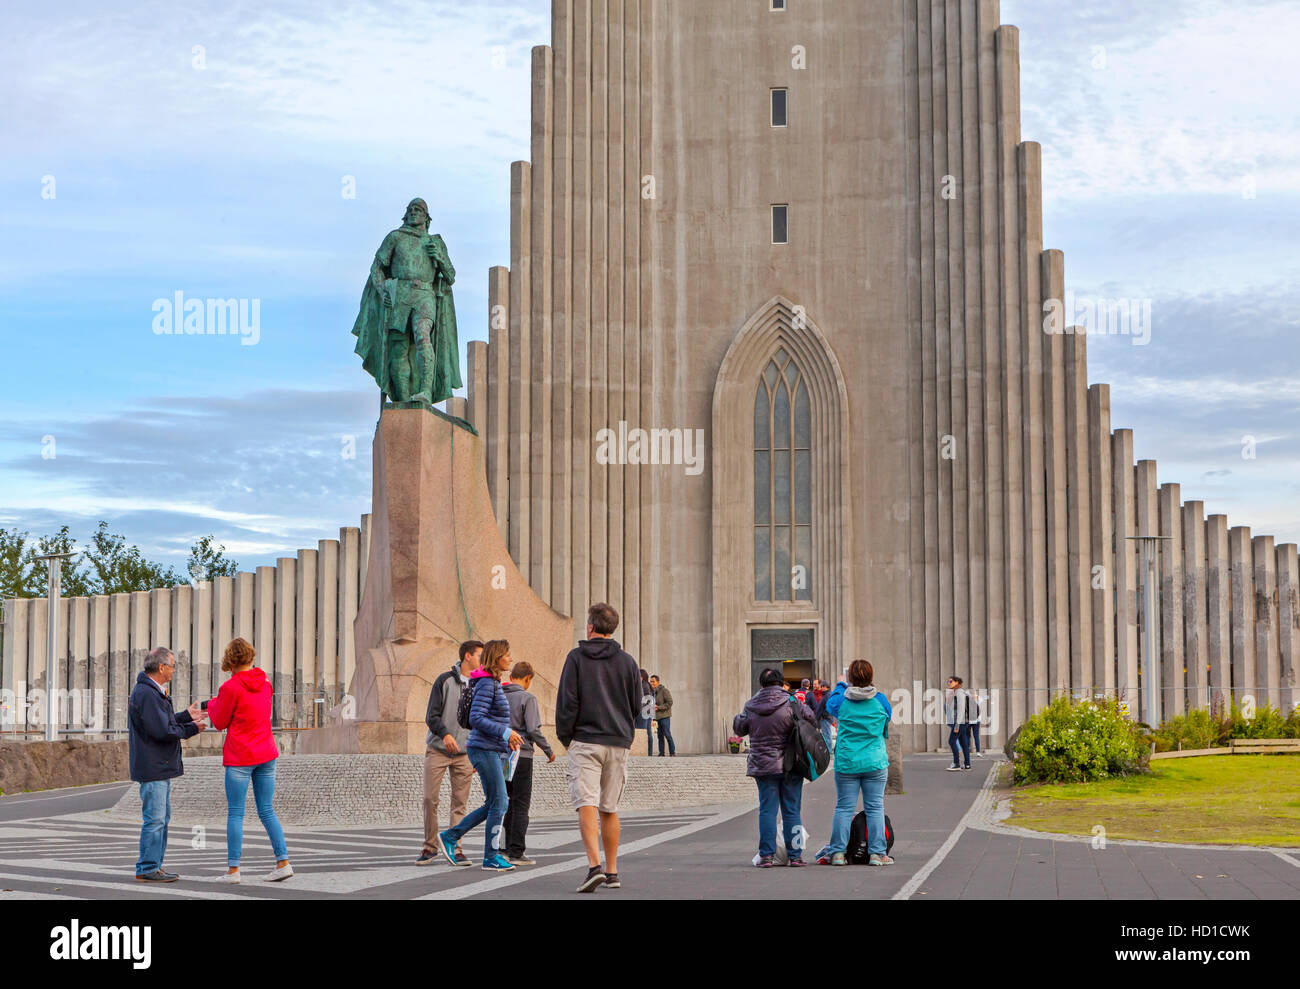 A view of people, tourists and the Hallgrimskirkja Lutheran Church in Reykjavik, Iceland. Stock Photo